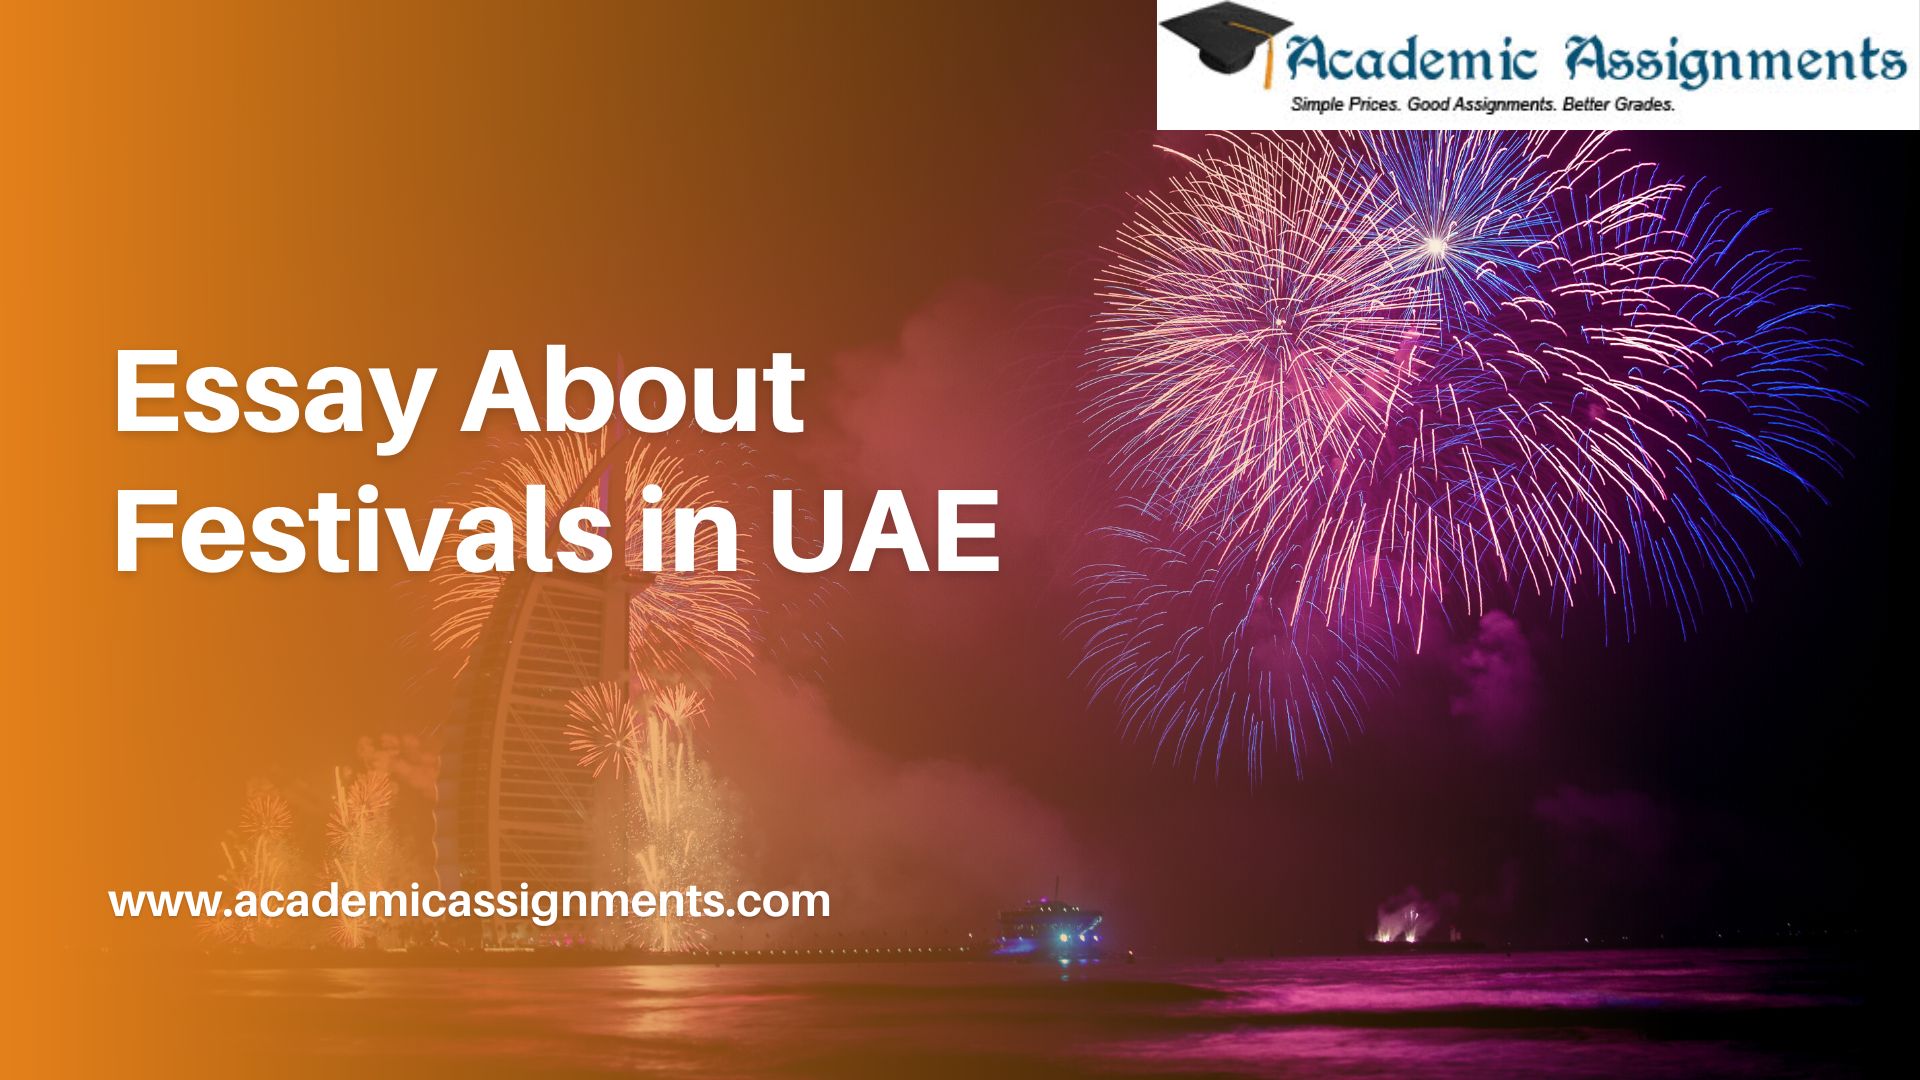 Essay About Festivals in UAE